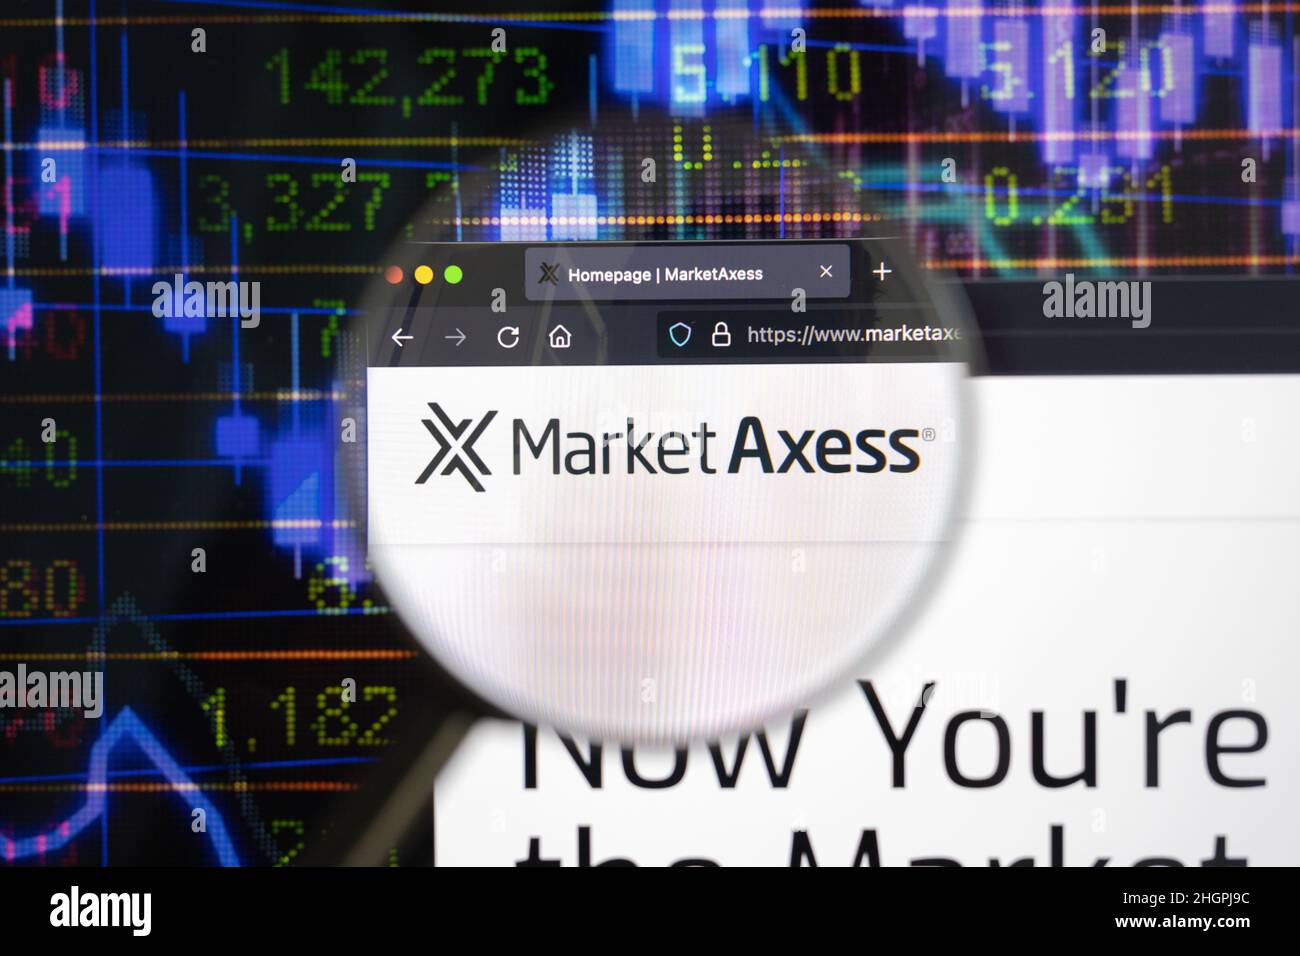 Market Axess company logo on a website with blurry stock market developments in the background, seen on a computer screen through a magnifying glass. Stock Photo